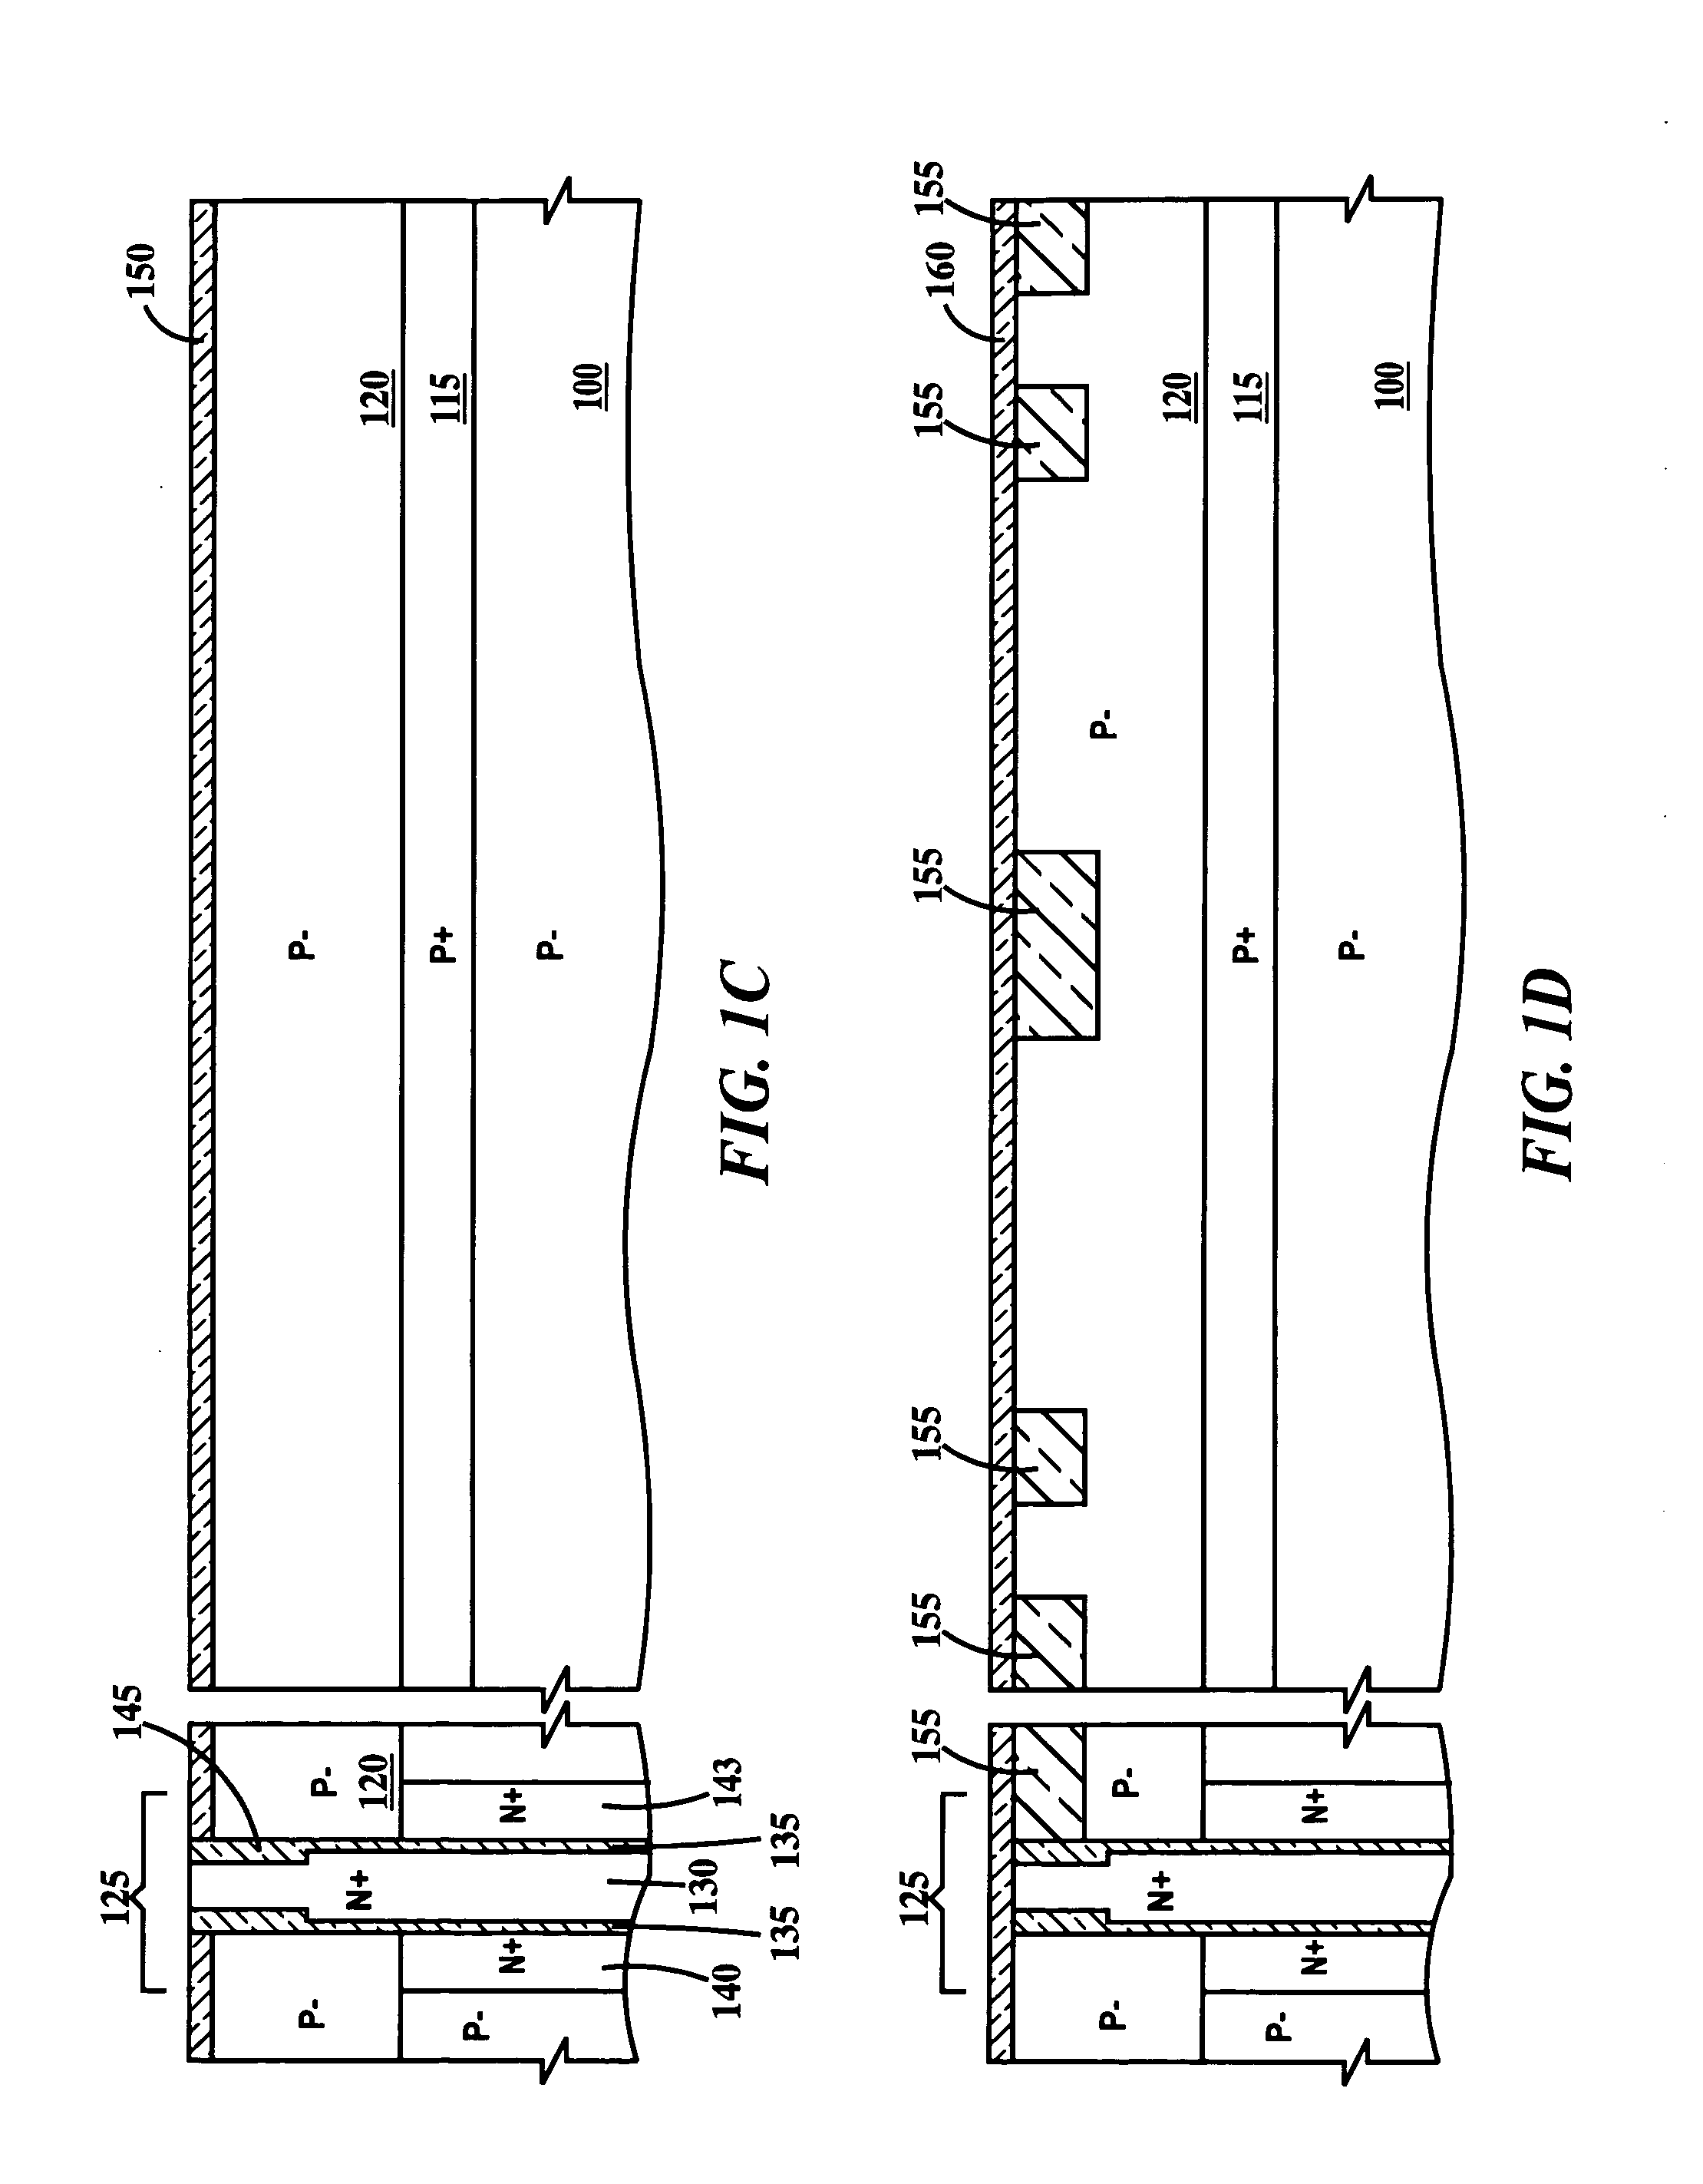 Triple-well CMOS devices with increased latch-up immunity and methods of fabricating same